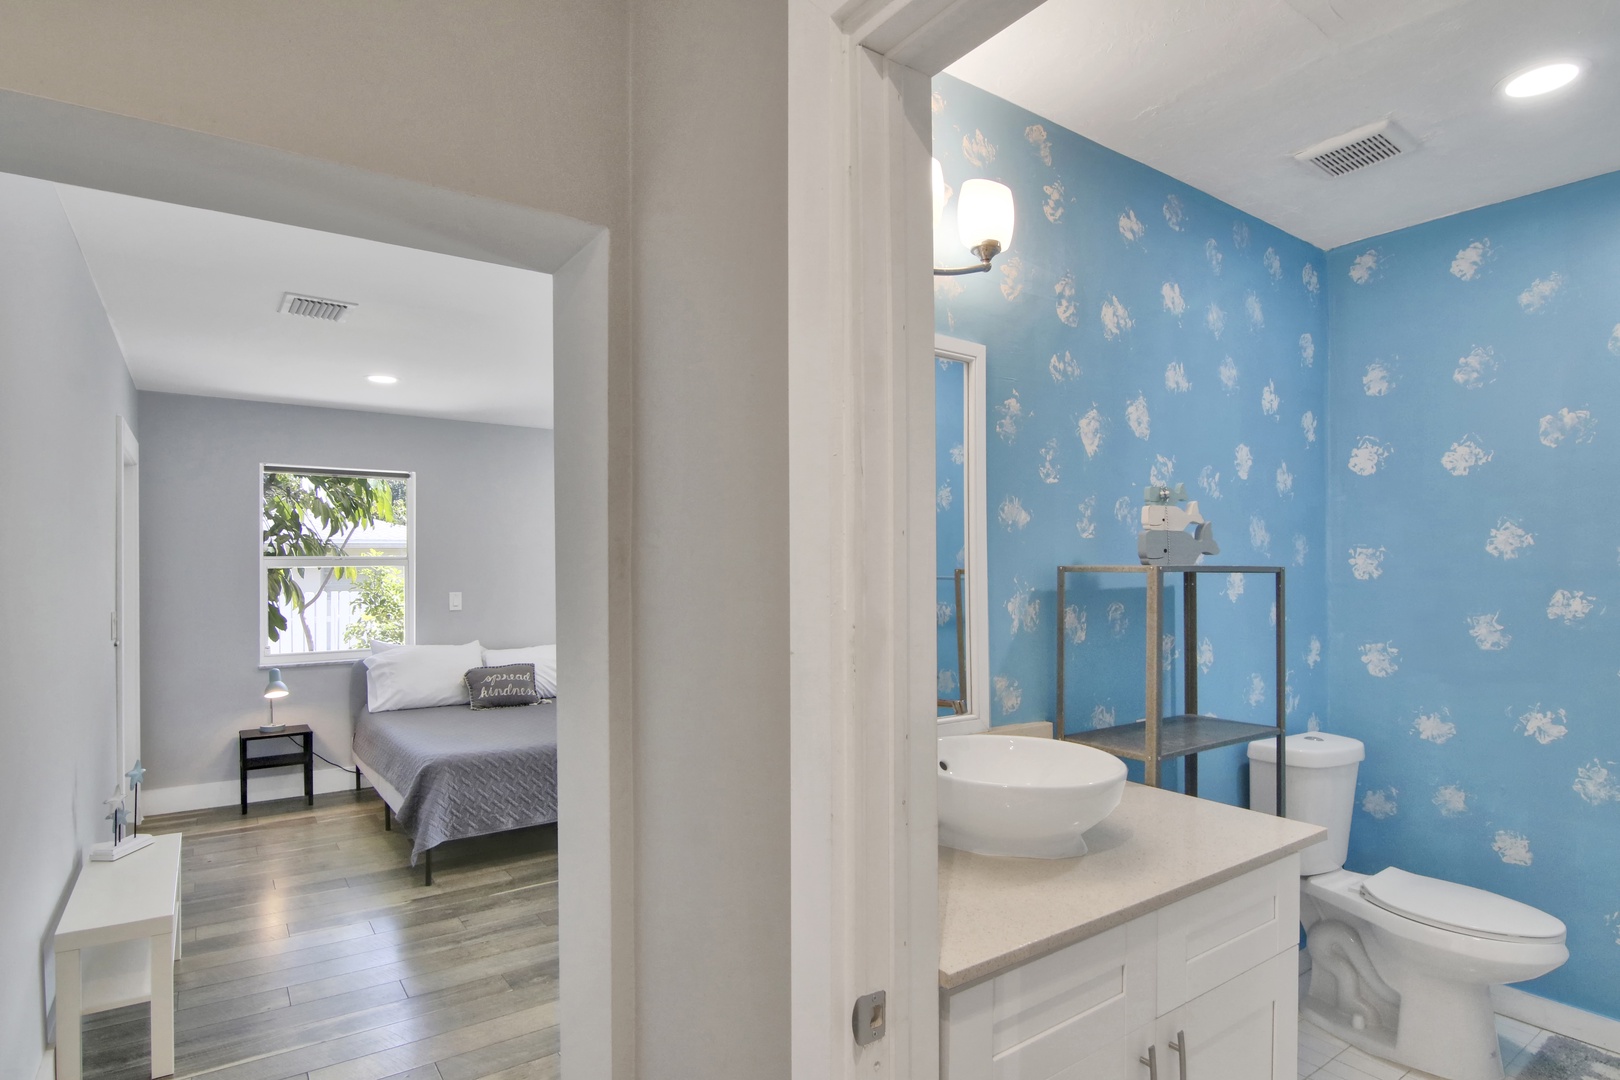 The ensuite bathroom includes a single vanity & shower/tub combo